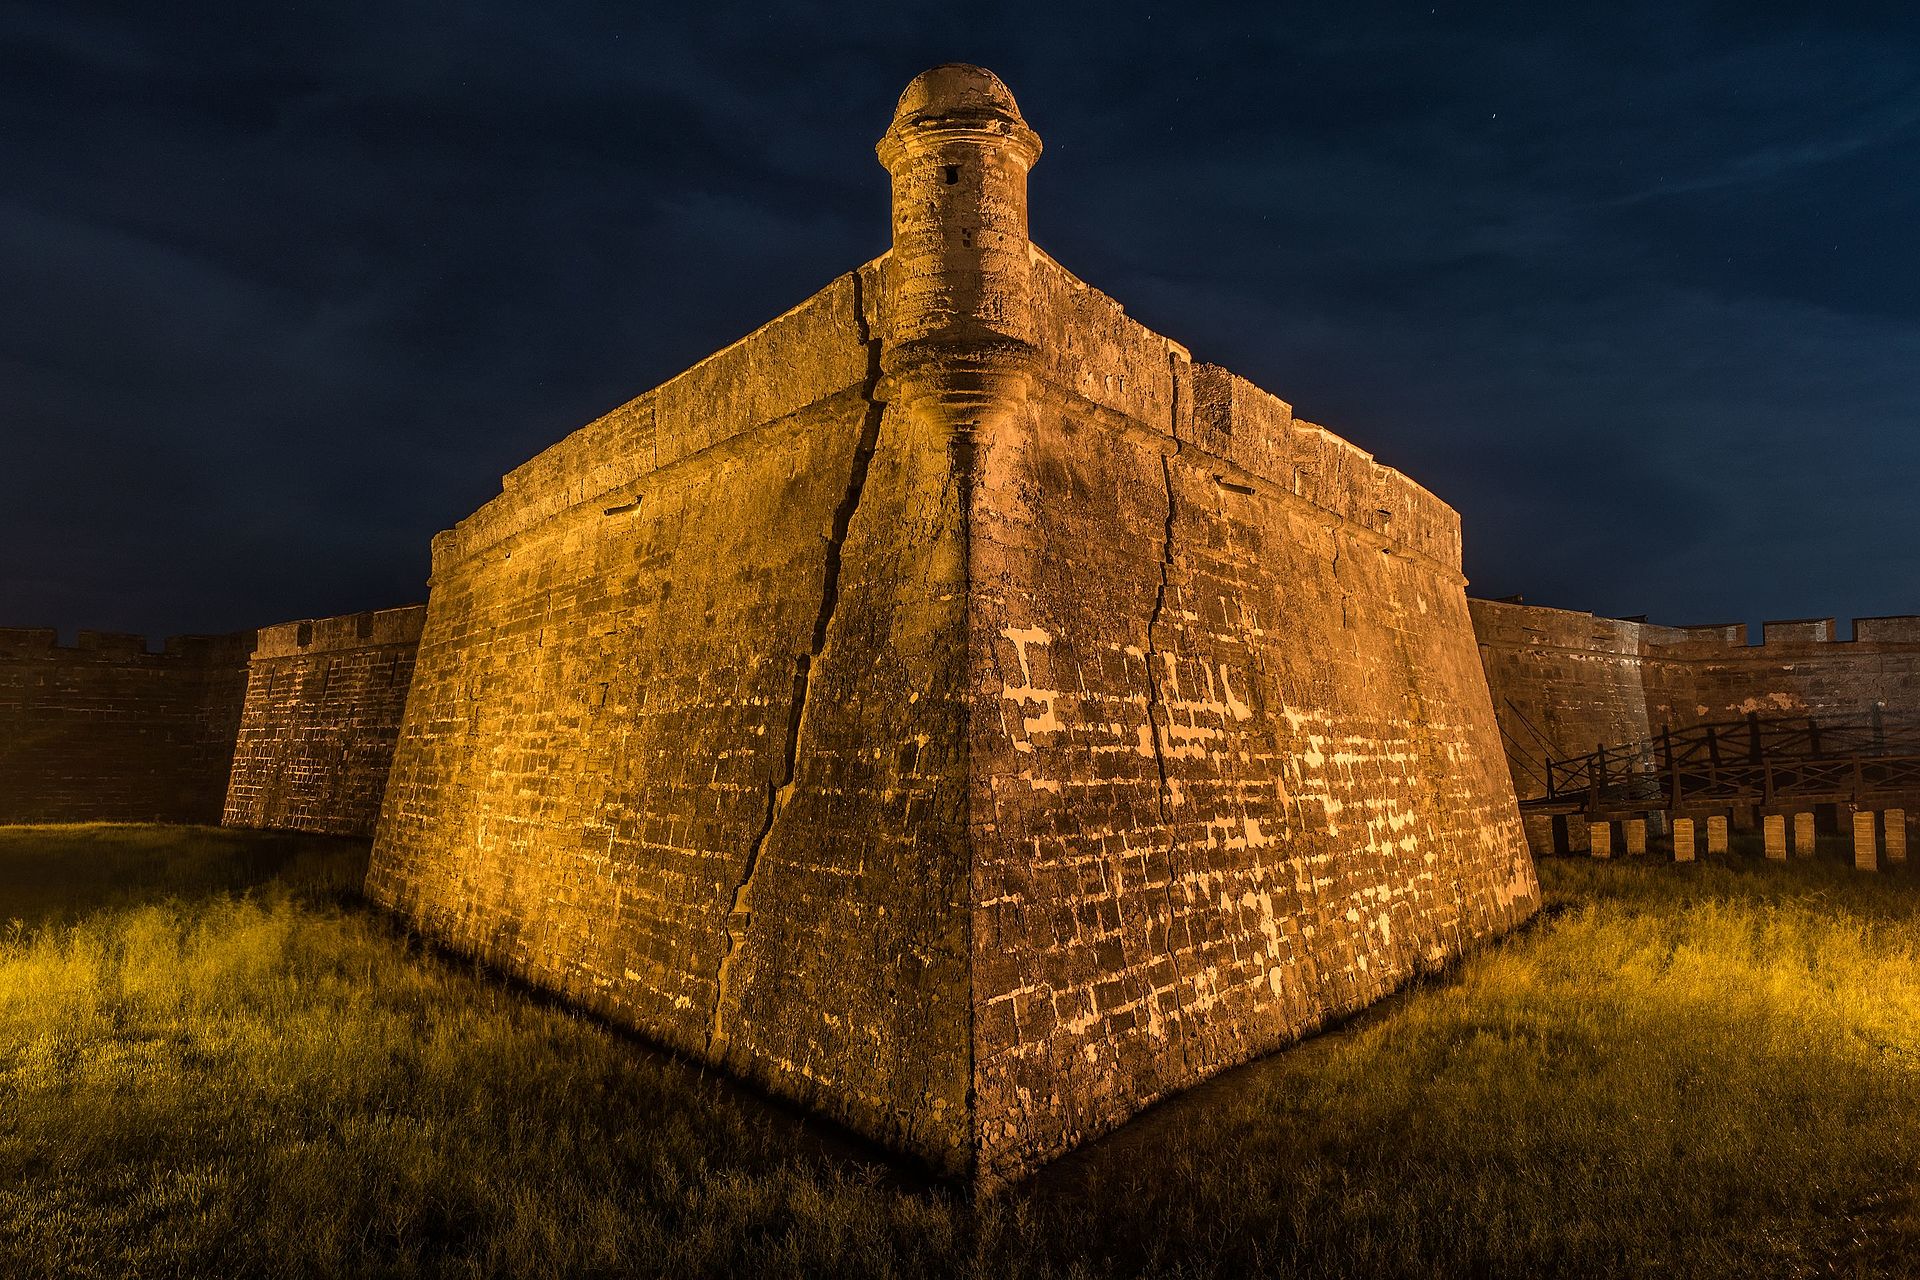 Castillo de San Marcos by night, it is said to be haunted